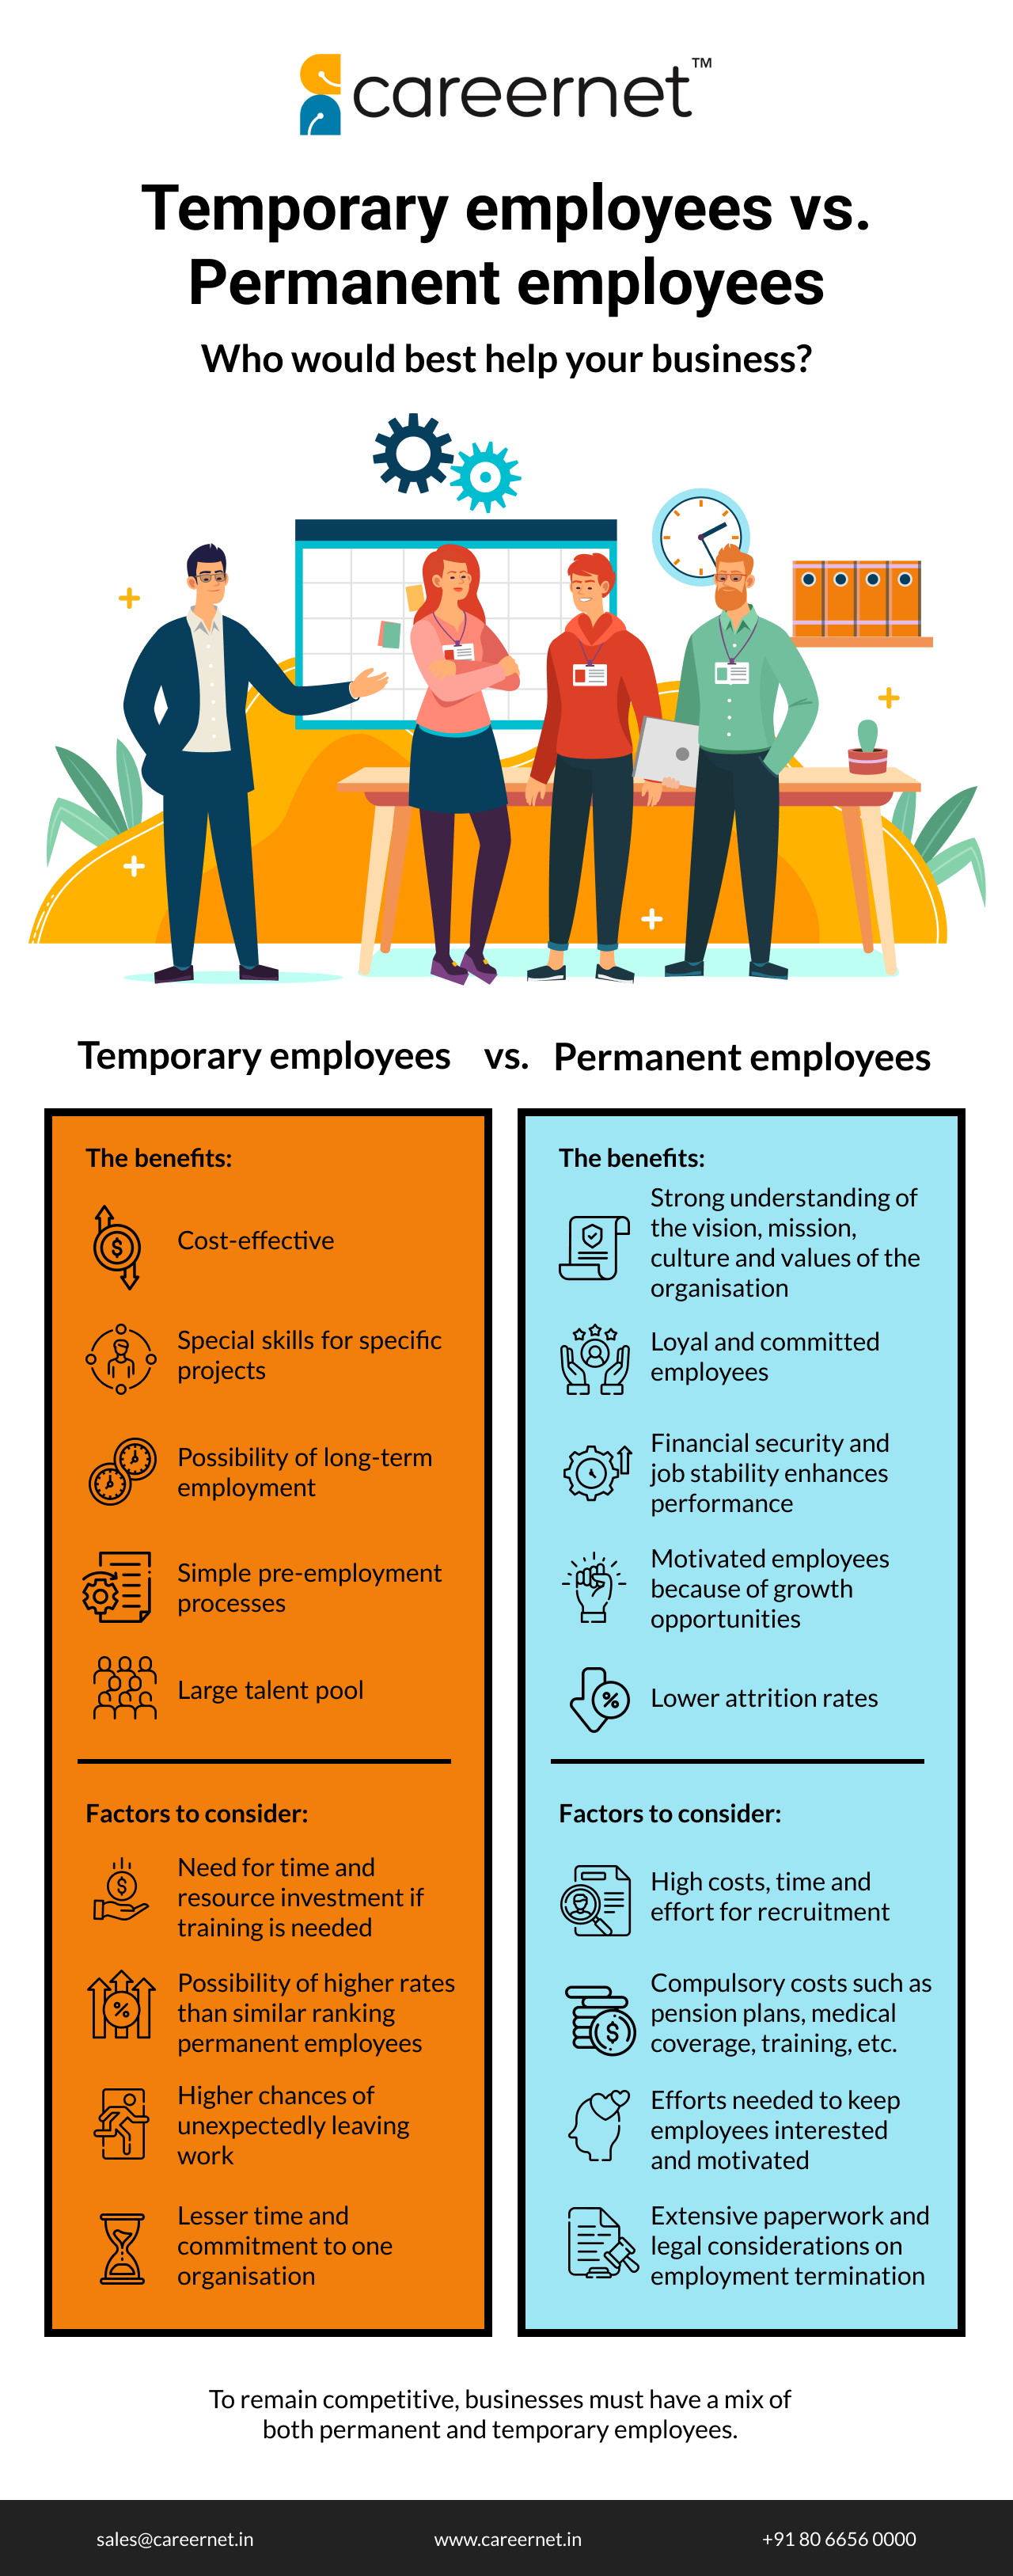  Temporary employees vs. Permanent employees Who would best help your business?